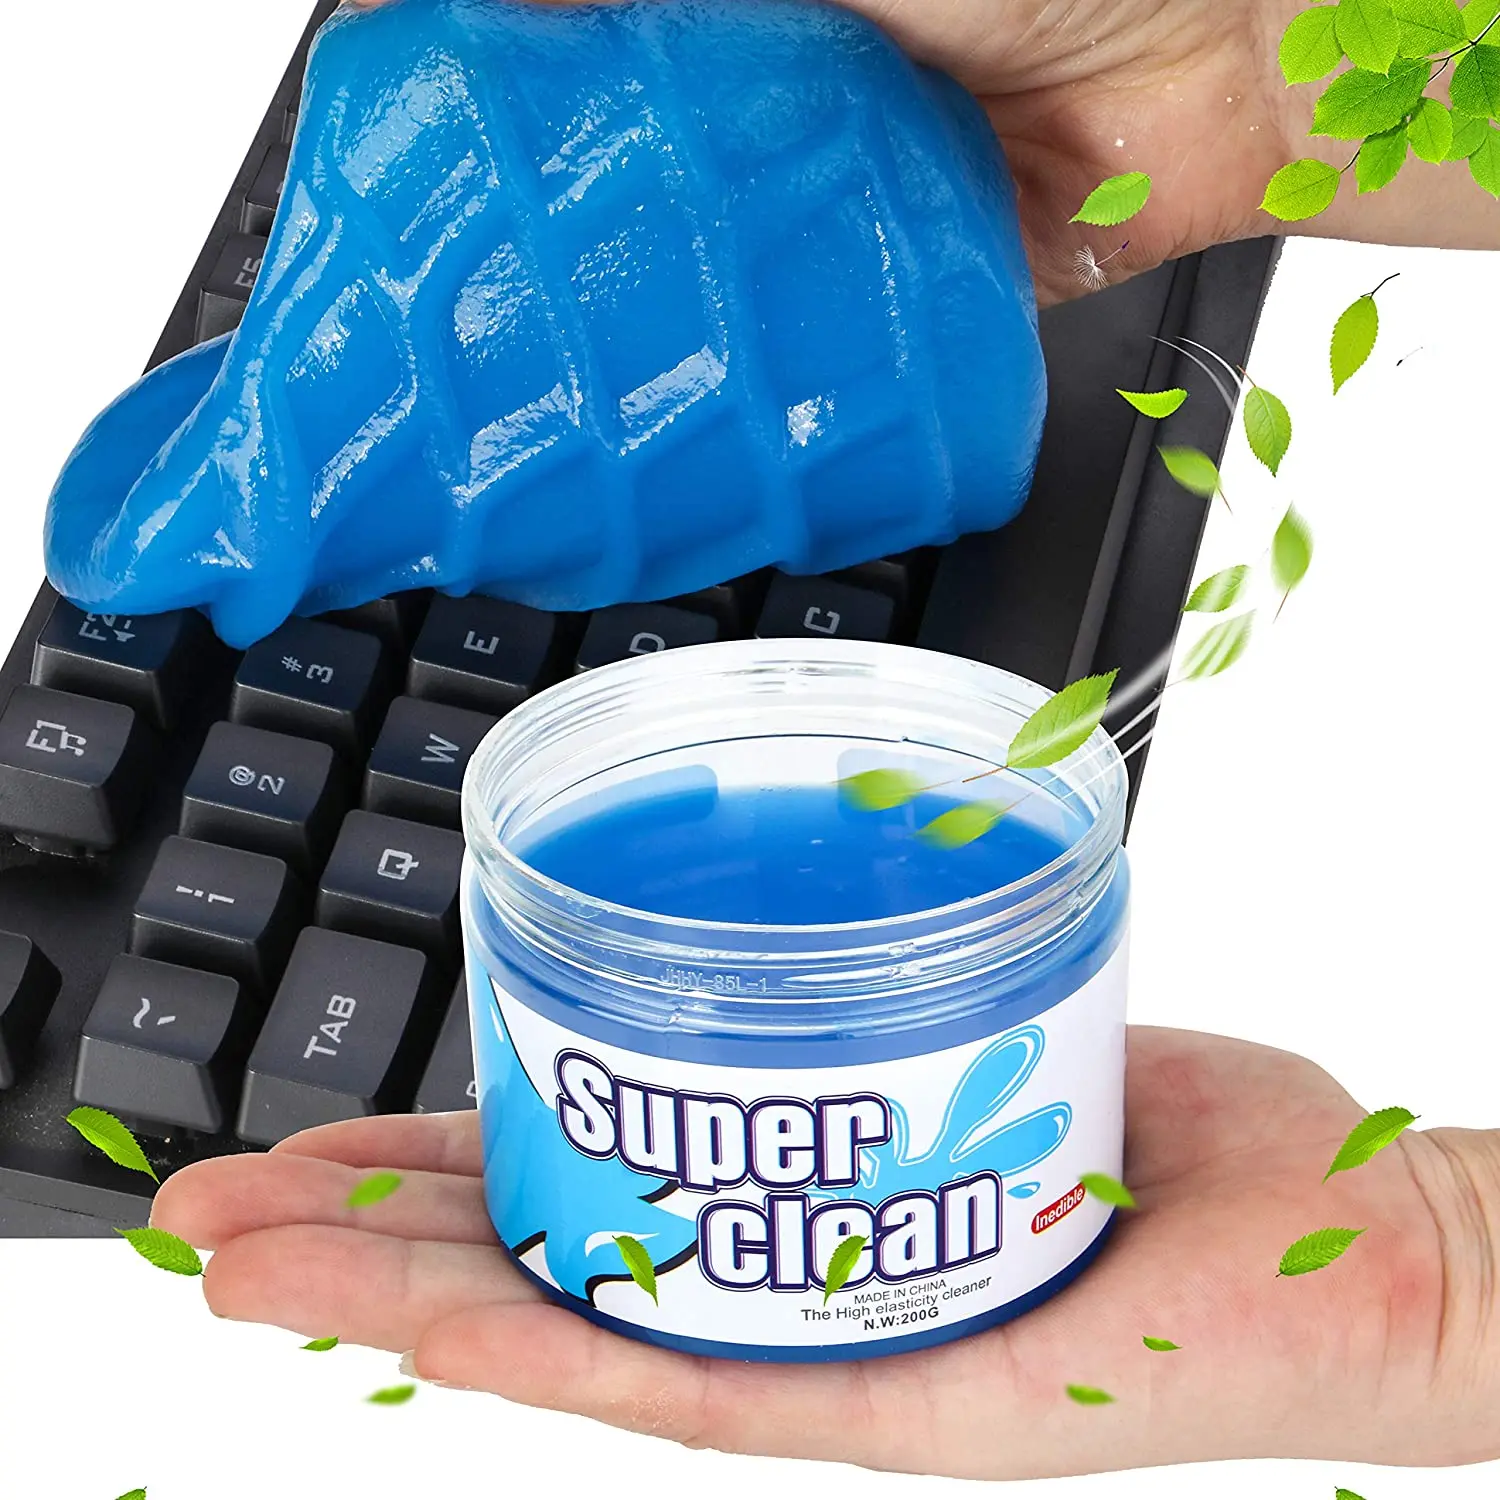 Universal Soft Cleaning Gel Car Air Vent Gap Dashboard Home Office Laptop Keyboard Detail Dust Dirt Removal Cleaner Glue Slime